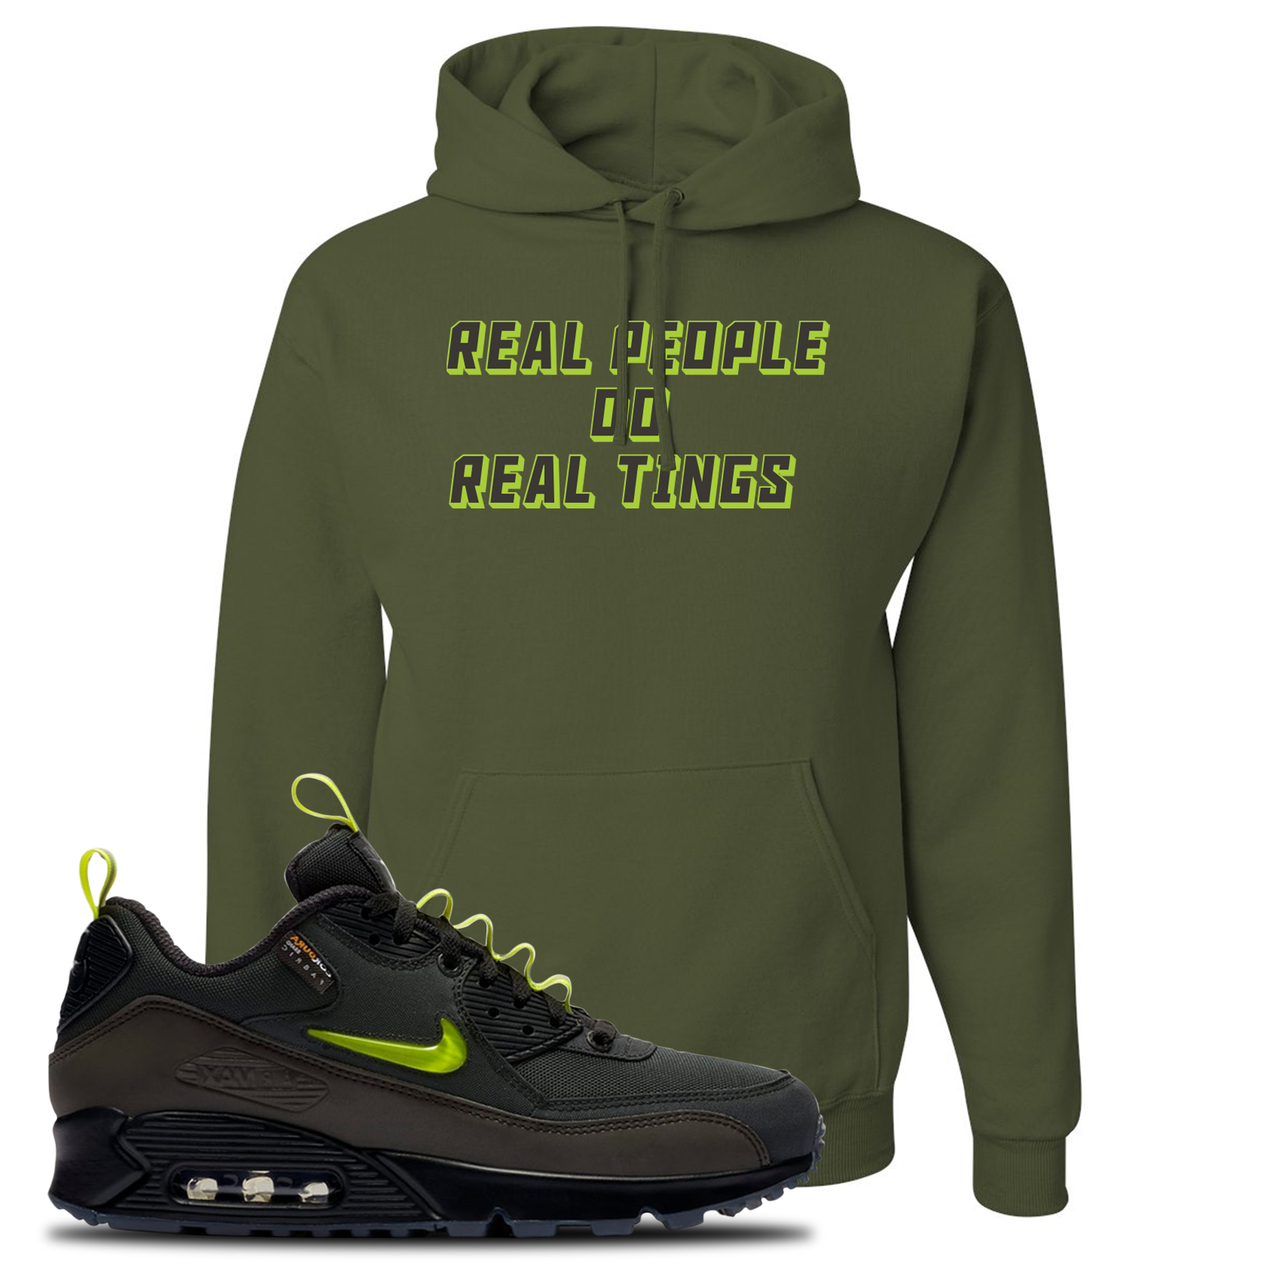 The Basement X Air Max 90 Manchester Real People Do Real Things Military Green Sneaker Hook Up Pullover Hoodie